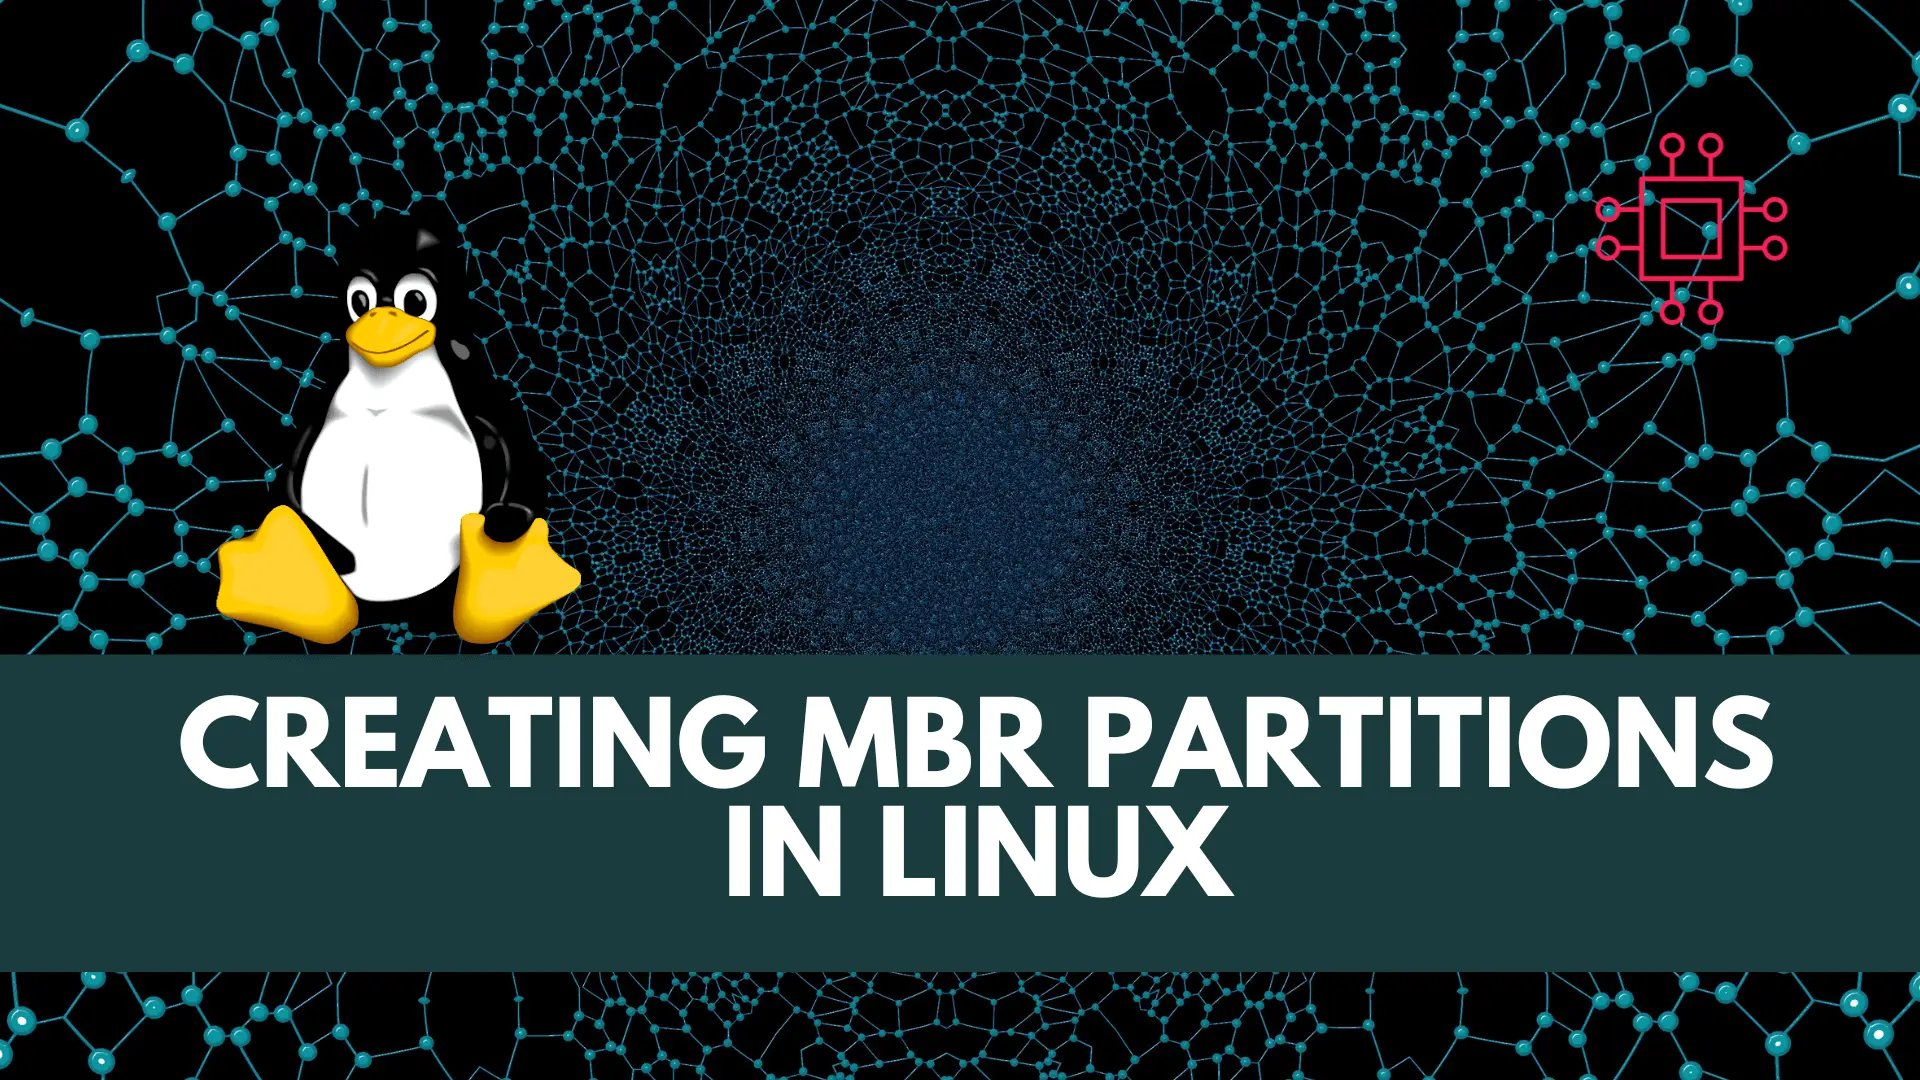 Creating MBR partitions in Linux